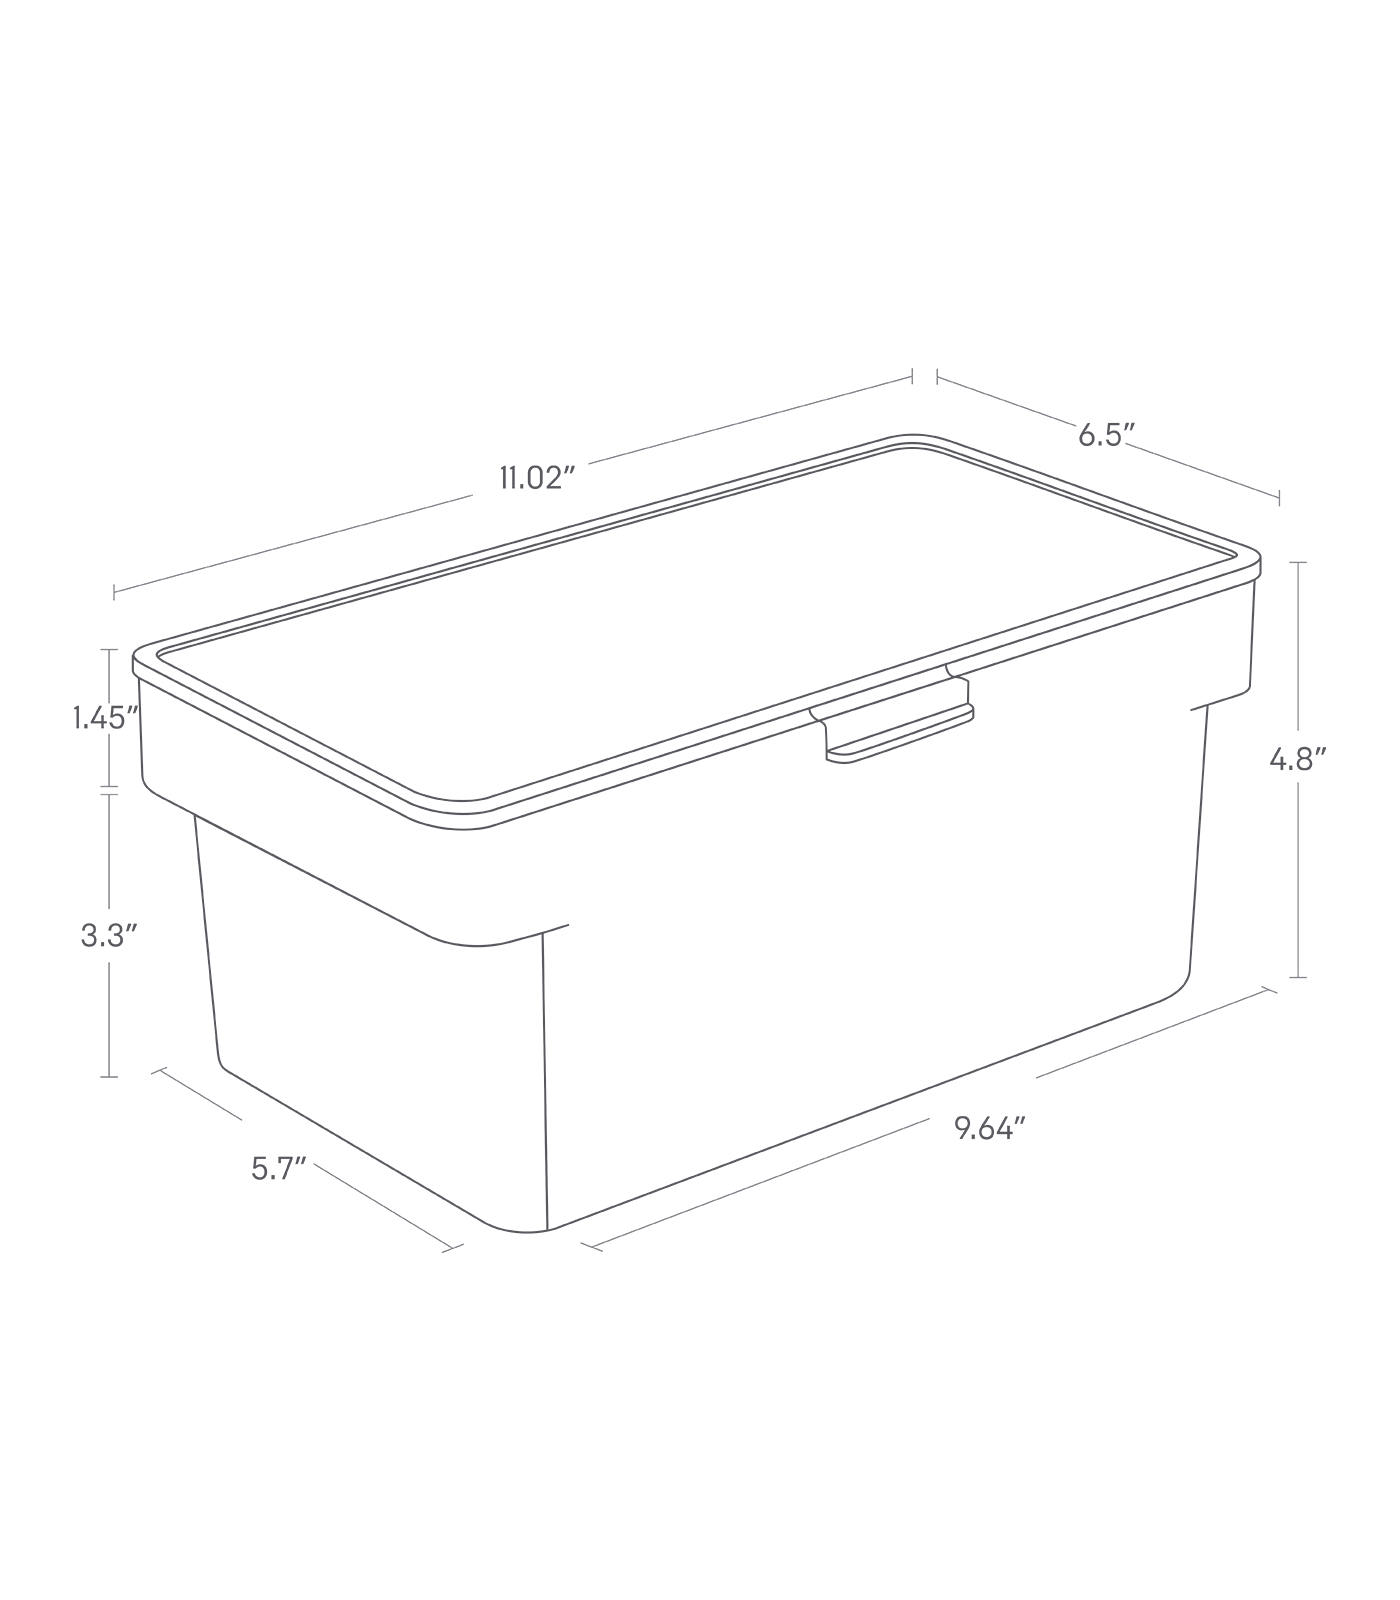 Dimension image for Airtight Pet Food Container - Three Sizes on a white background including dimensions  L 6.5 x W 11.02 x H 4.8 inches